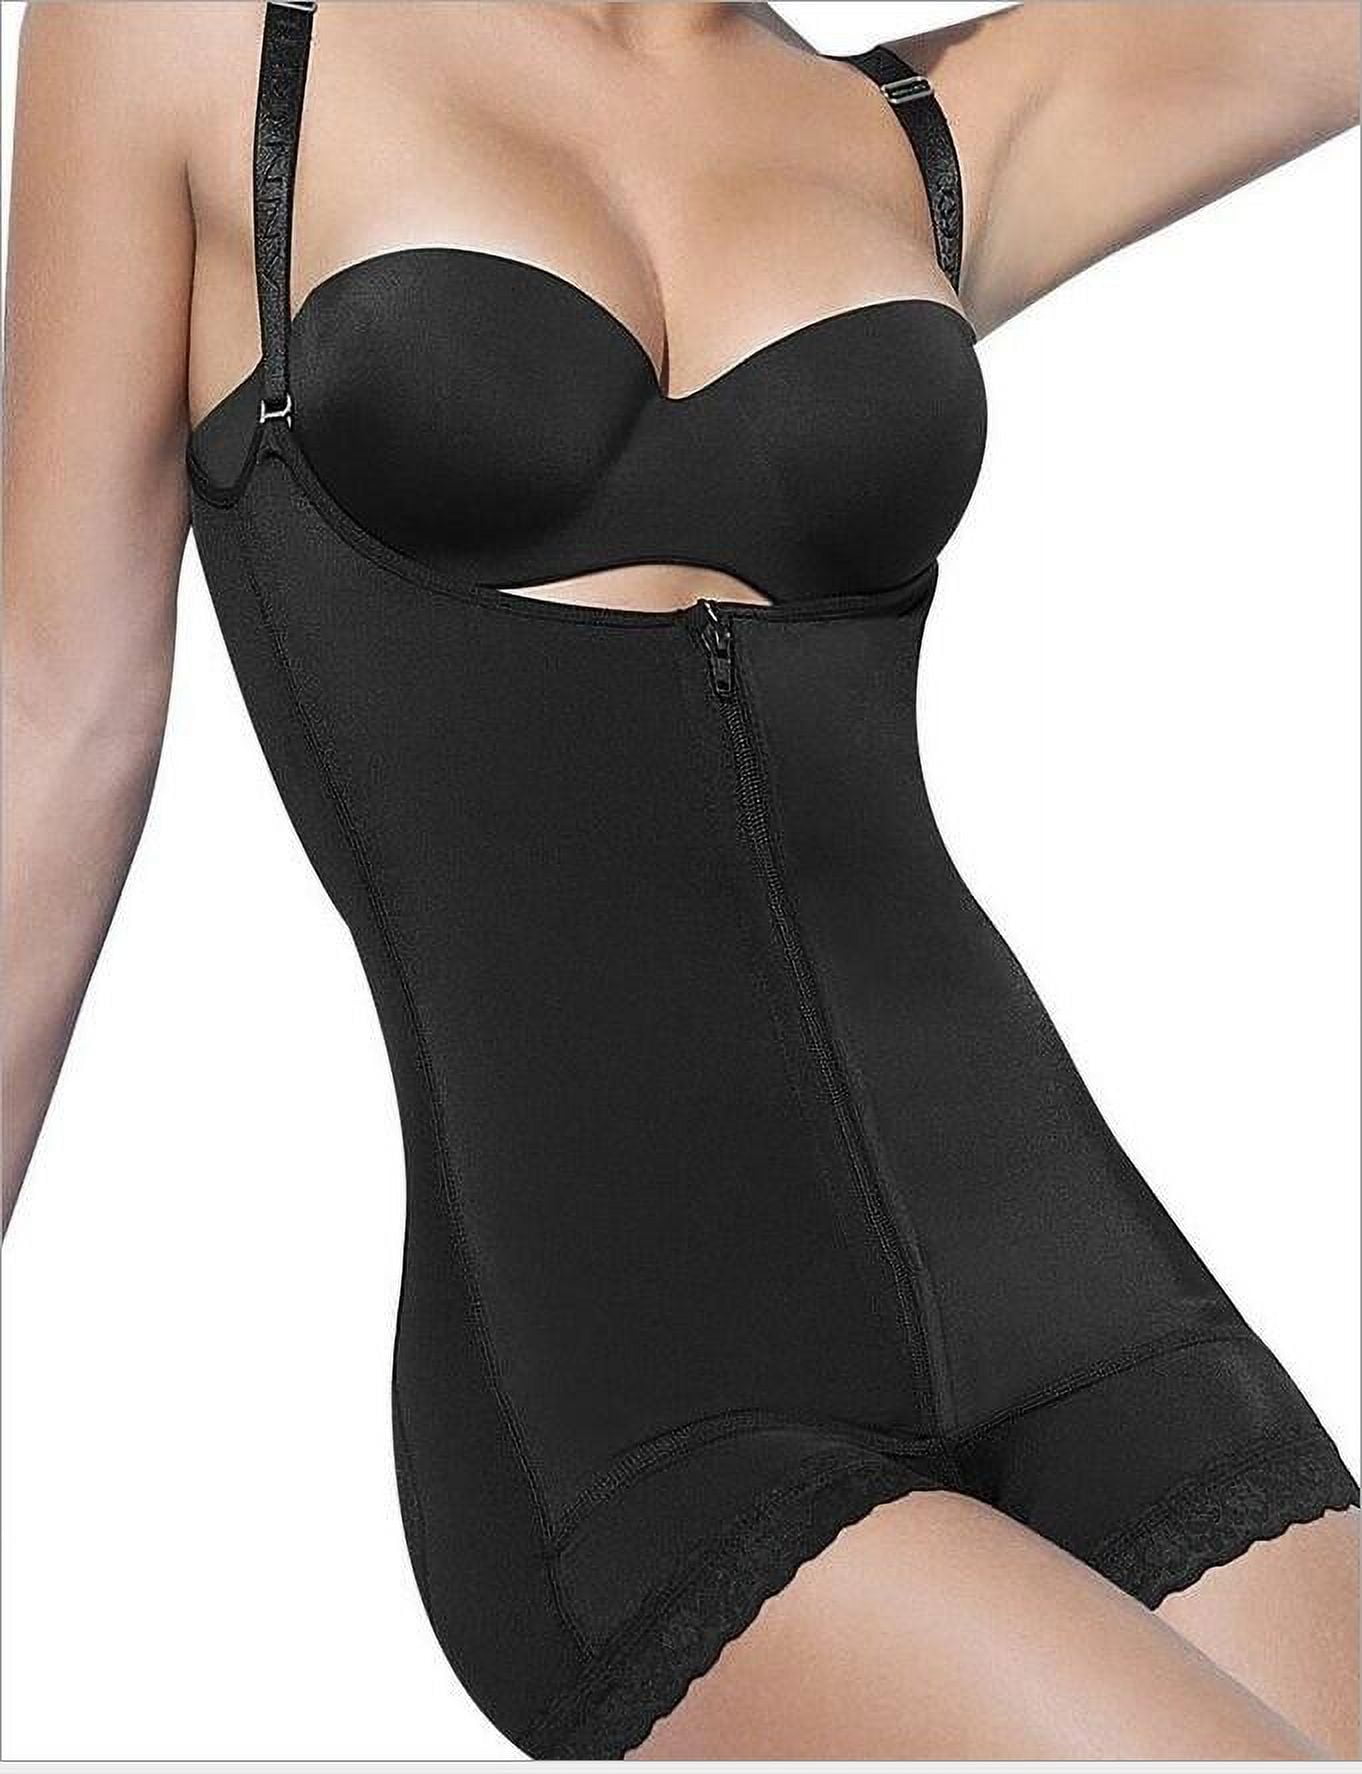 Latex Waist Cincher With Butt Lifter And Full Body Prima Donna Shapewear  Sheath For Women Slimming Girdle With Strap And Sheaths 9088 From  Andreagirl, $22.09